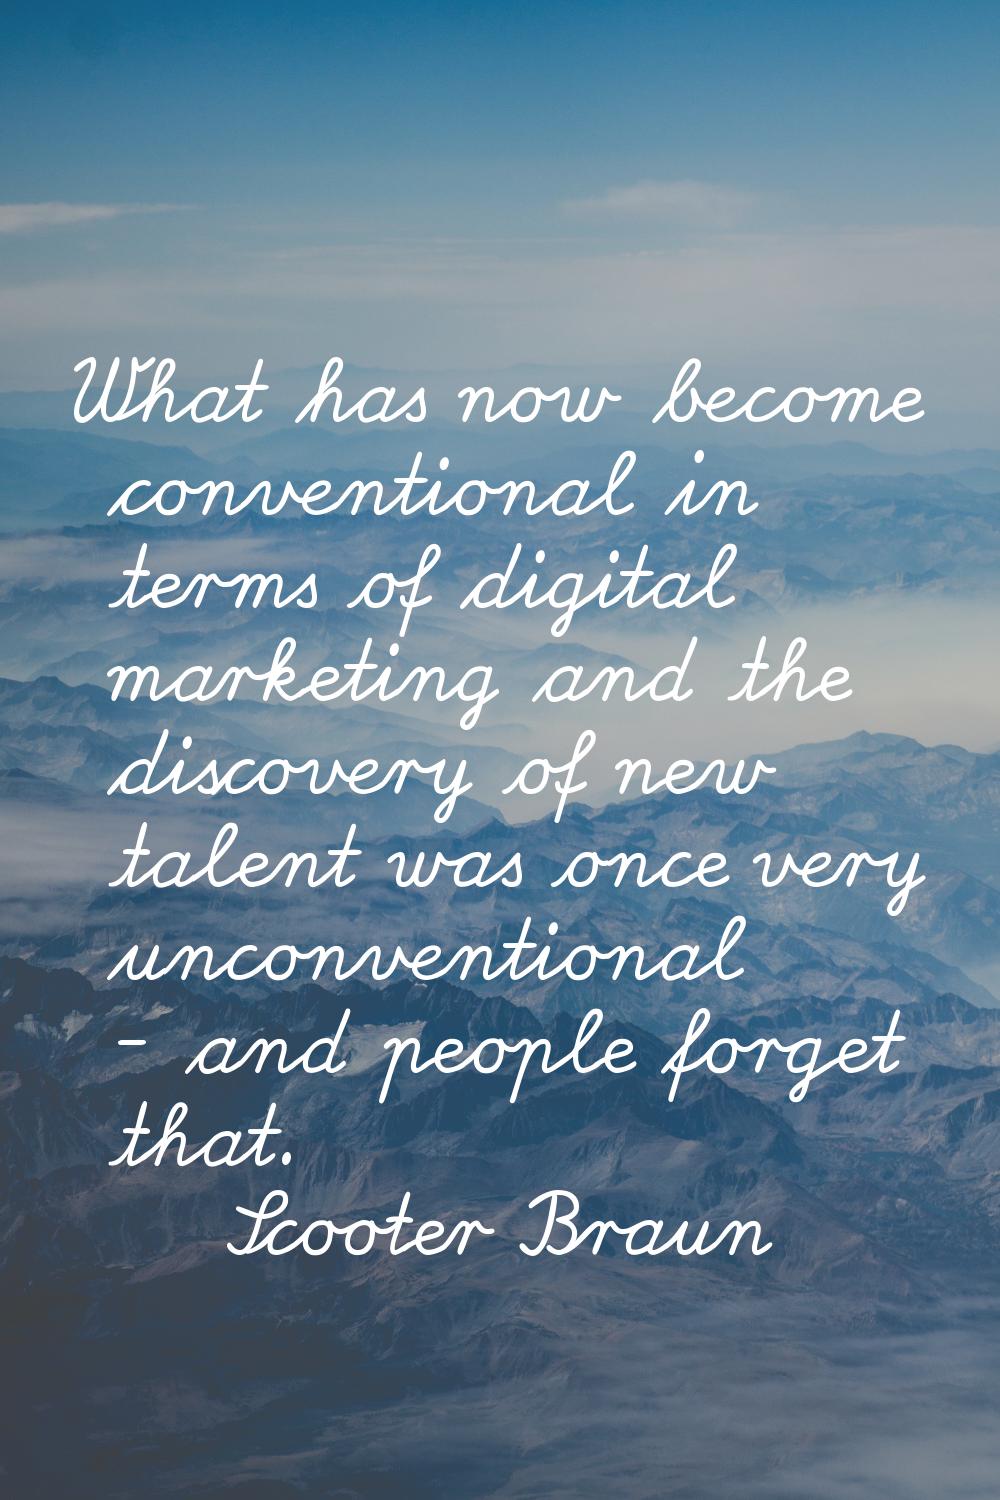 What has now become conventional in terms of digital marketing and the discovery of new talent was 